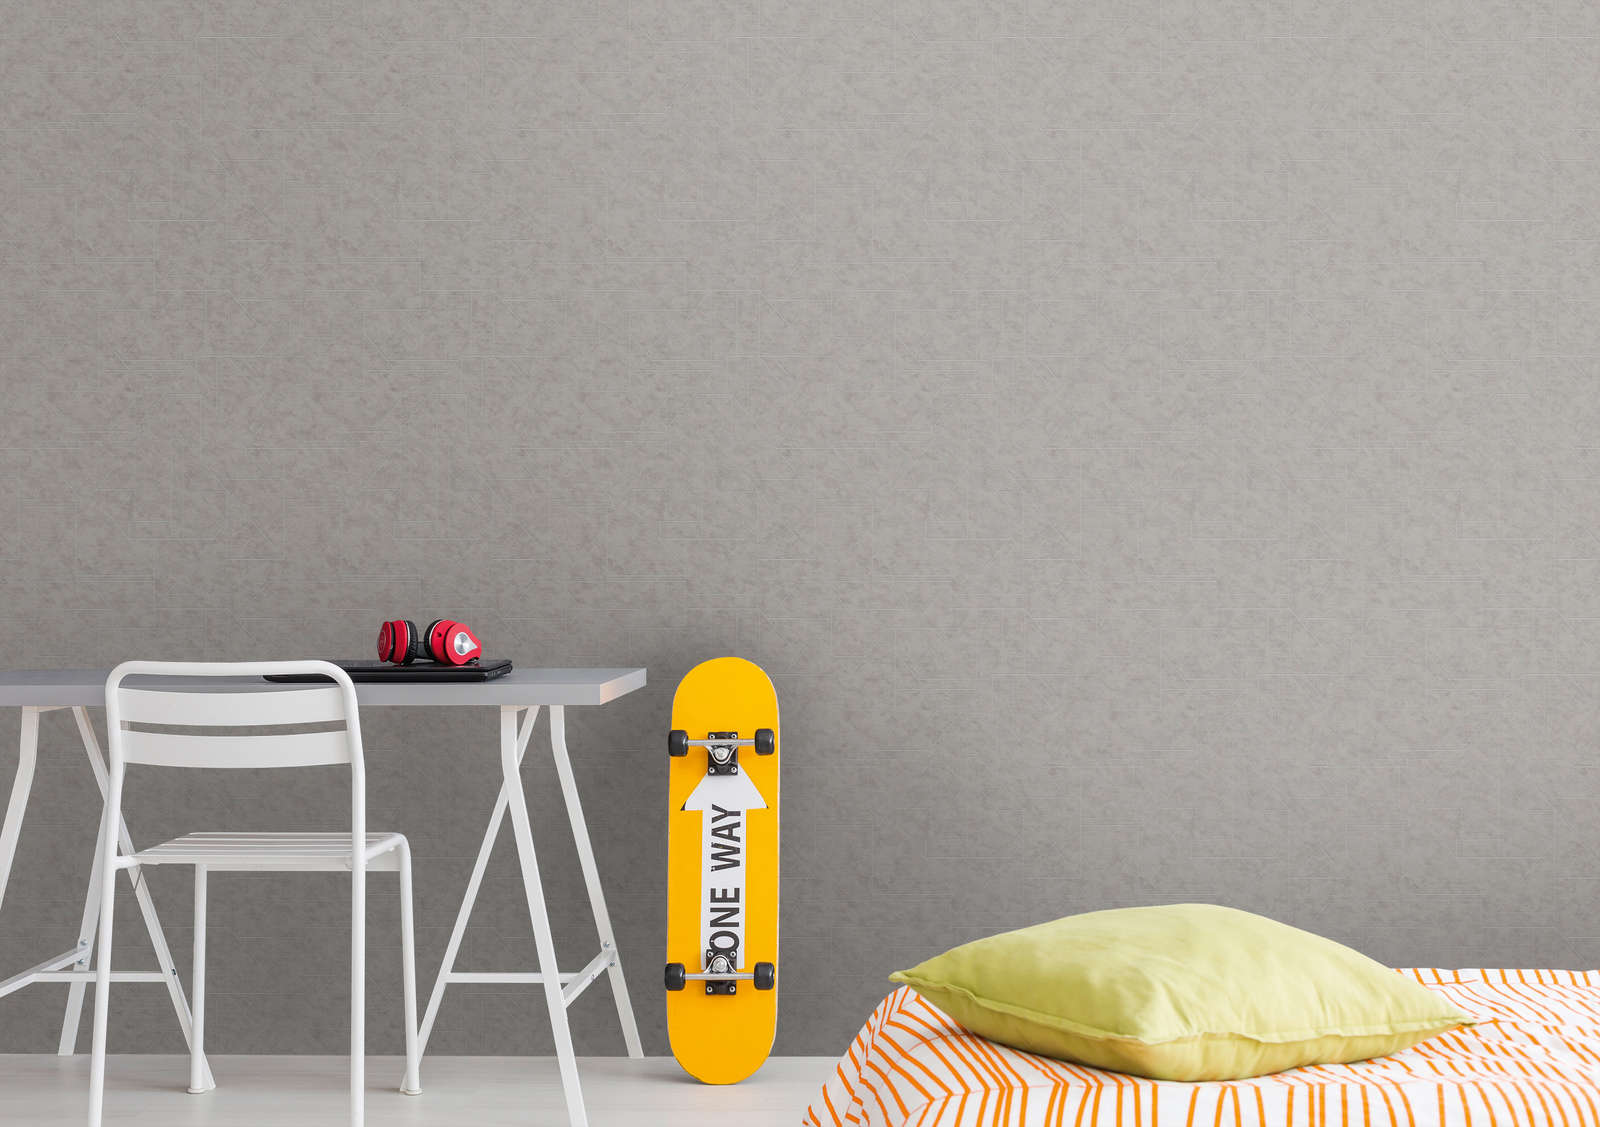             Graphic non-woven wallpaper with line pattern - grey, silver
        